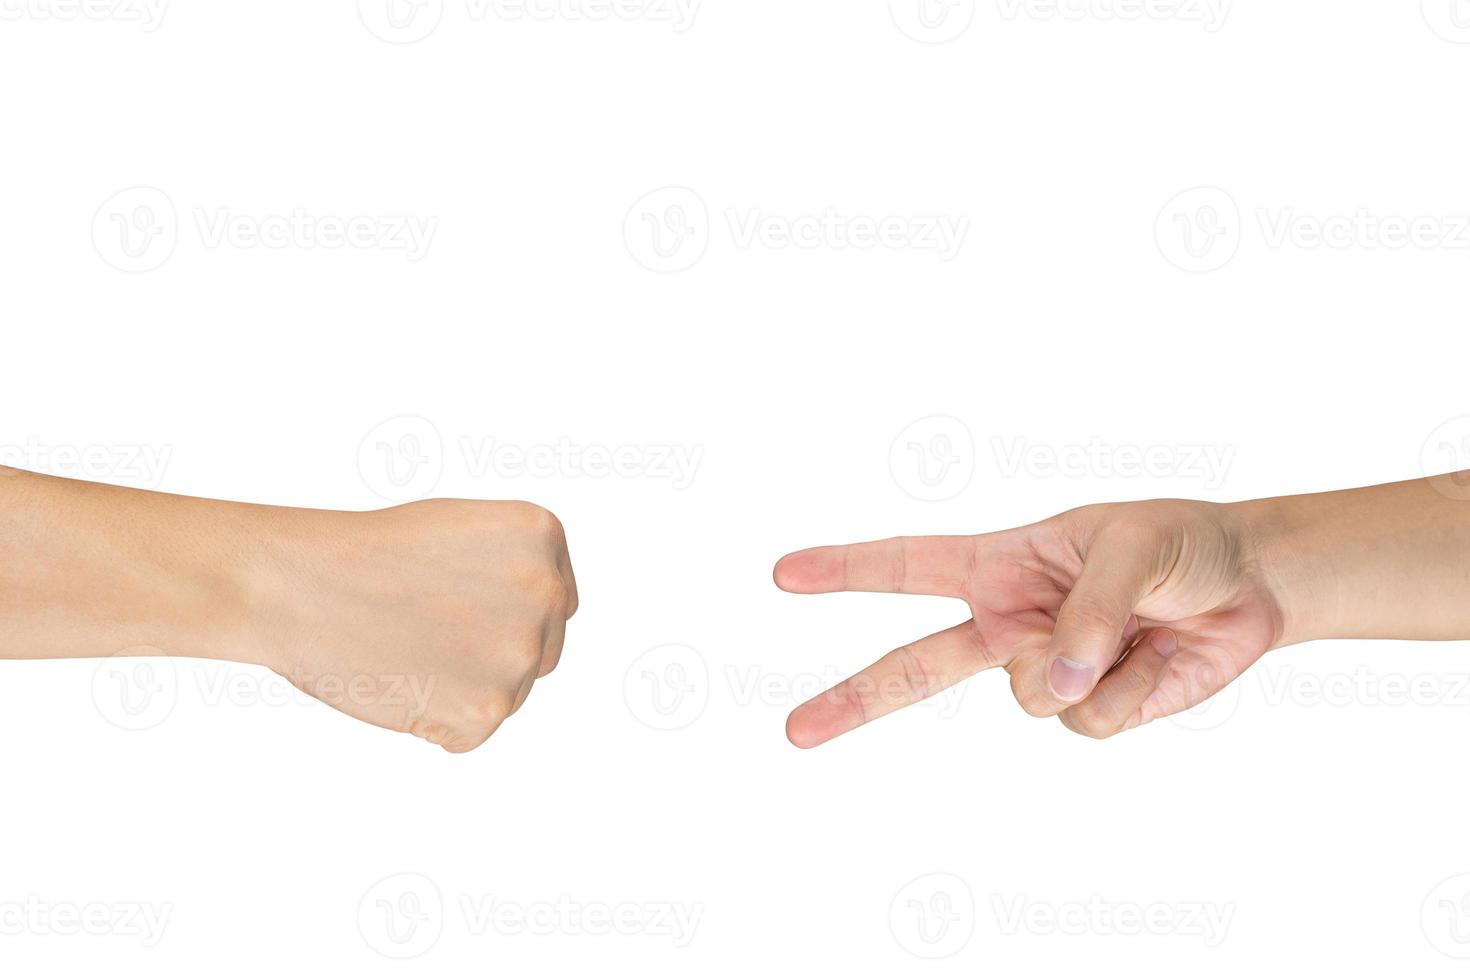 Rock Paper Scissors gambling hand game for all of ages and sex. This is Asian male hands post on white background. photo